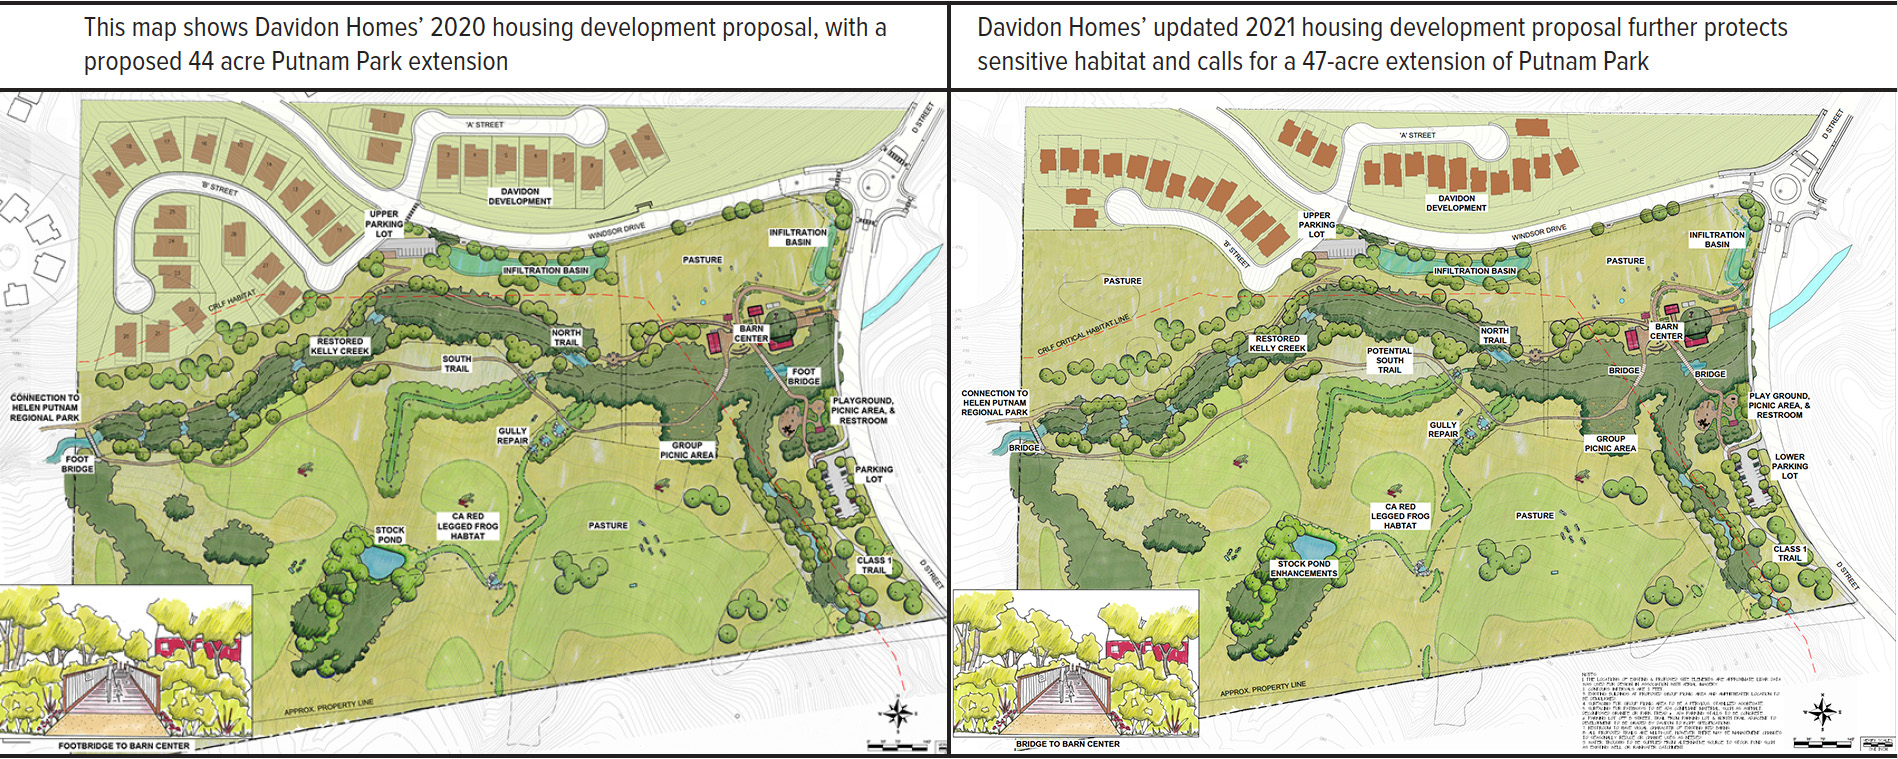 Side by side comparison of 2 versions of Map of proposed park extension and housing plan. Details include drawings of the proposed homes, new streets, riparian area around Kelly Creek, parking lots, and barn center. The map includes labels that show the two proposed infiltration basins, new trails, and other details.